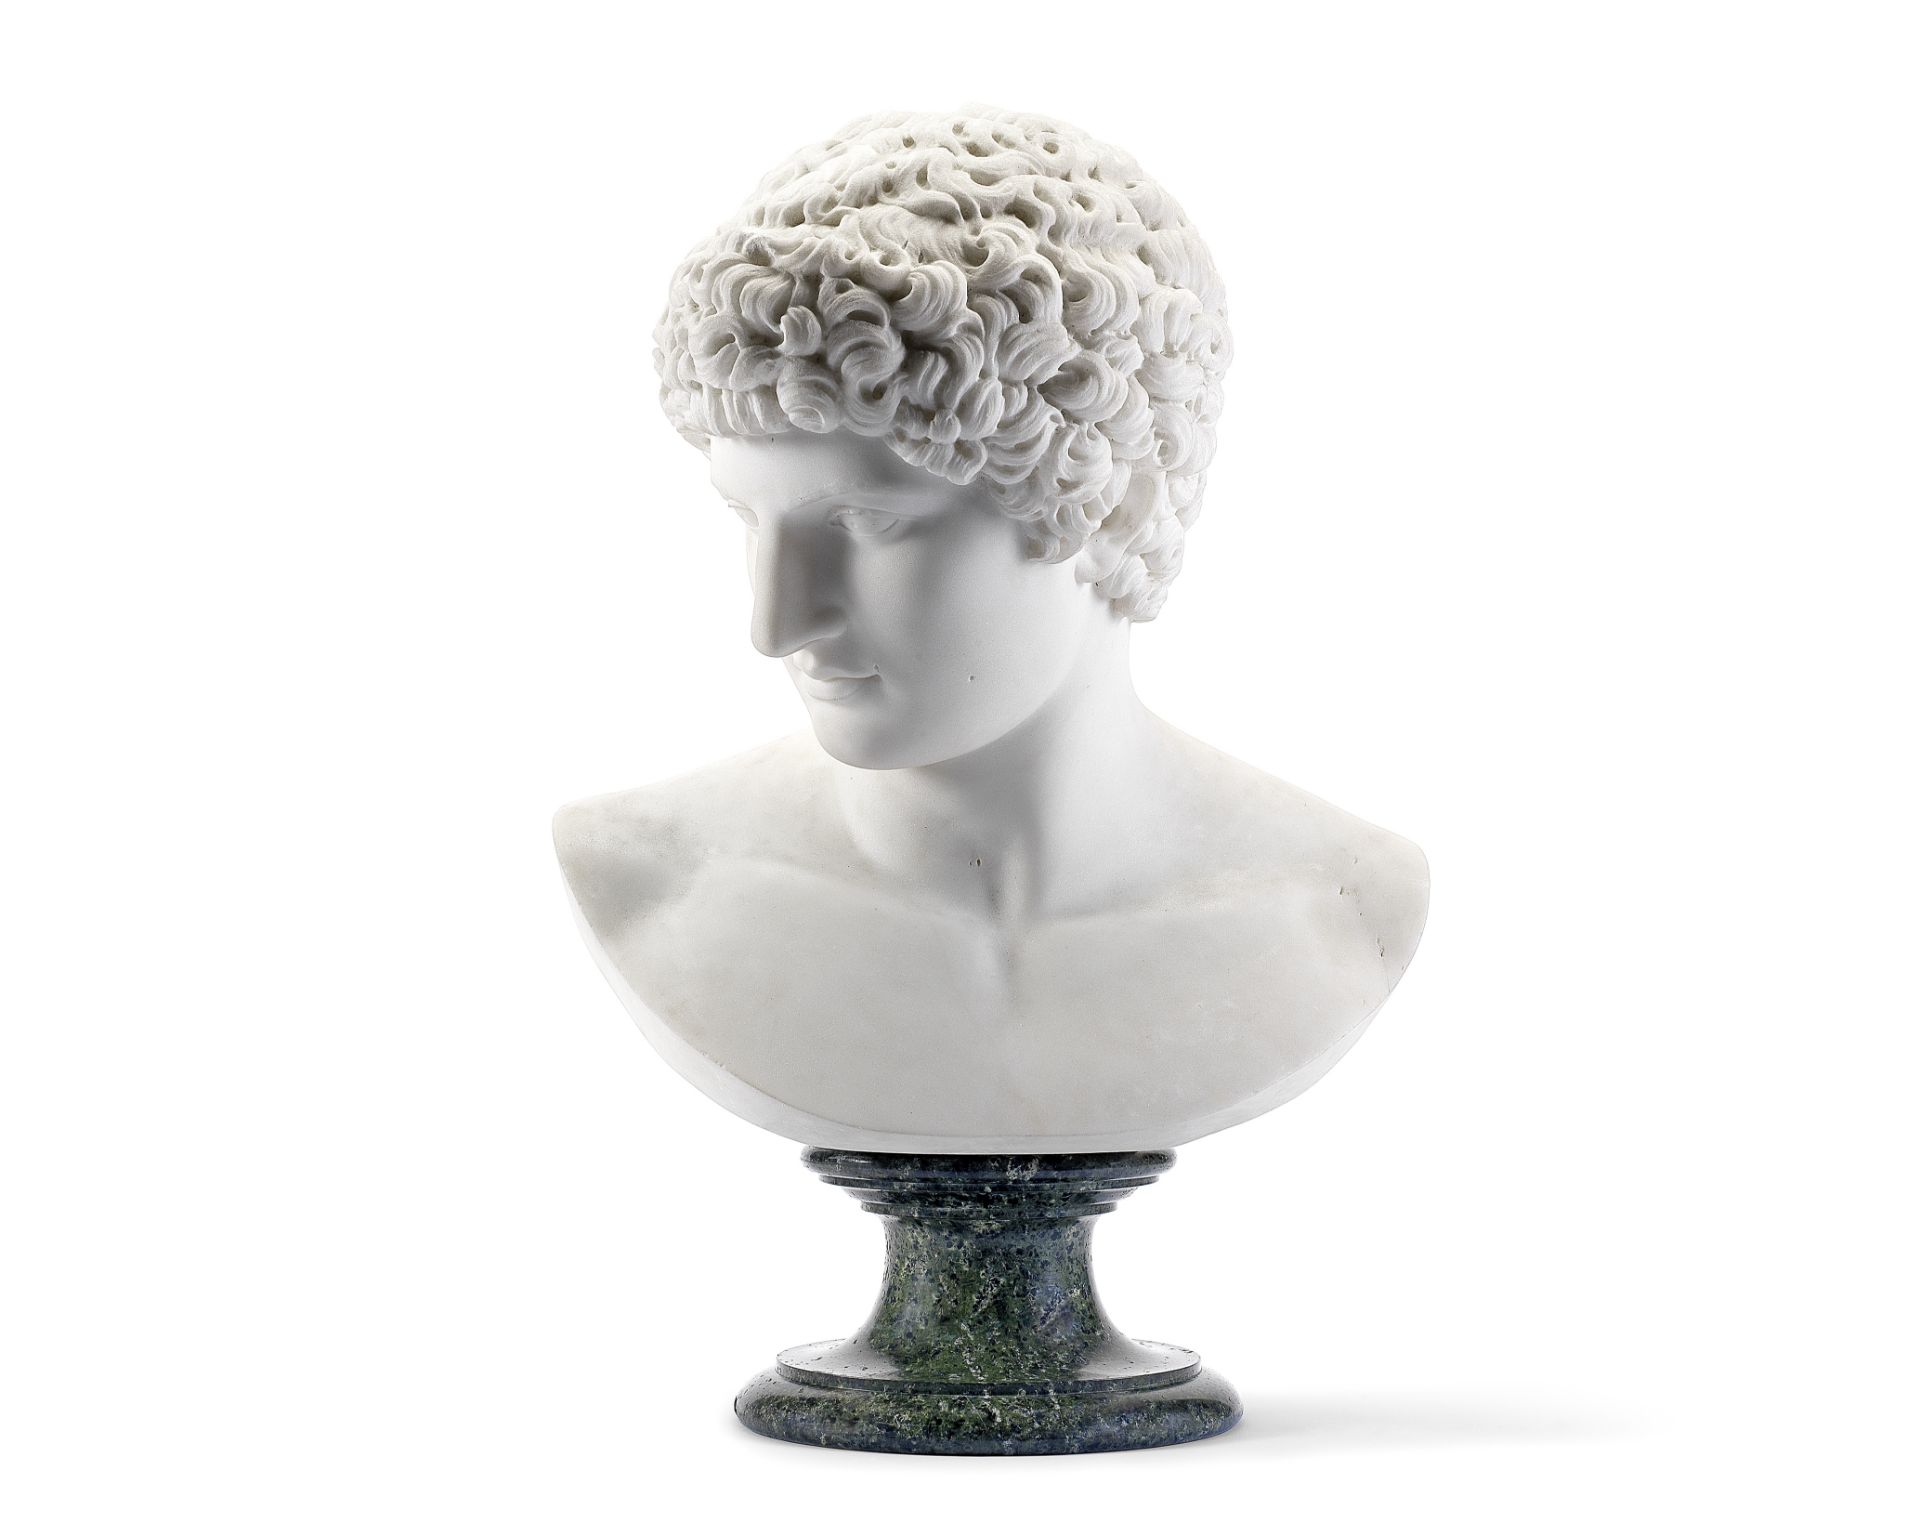 An early 19th century Italian Grand Tour carved white marble bust of Antinous after the antique